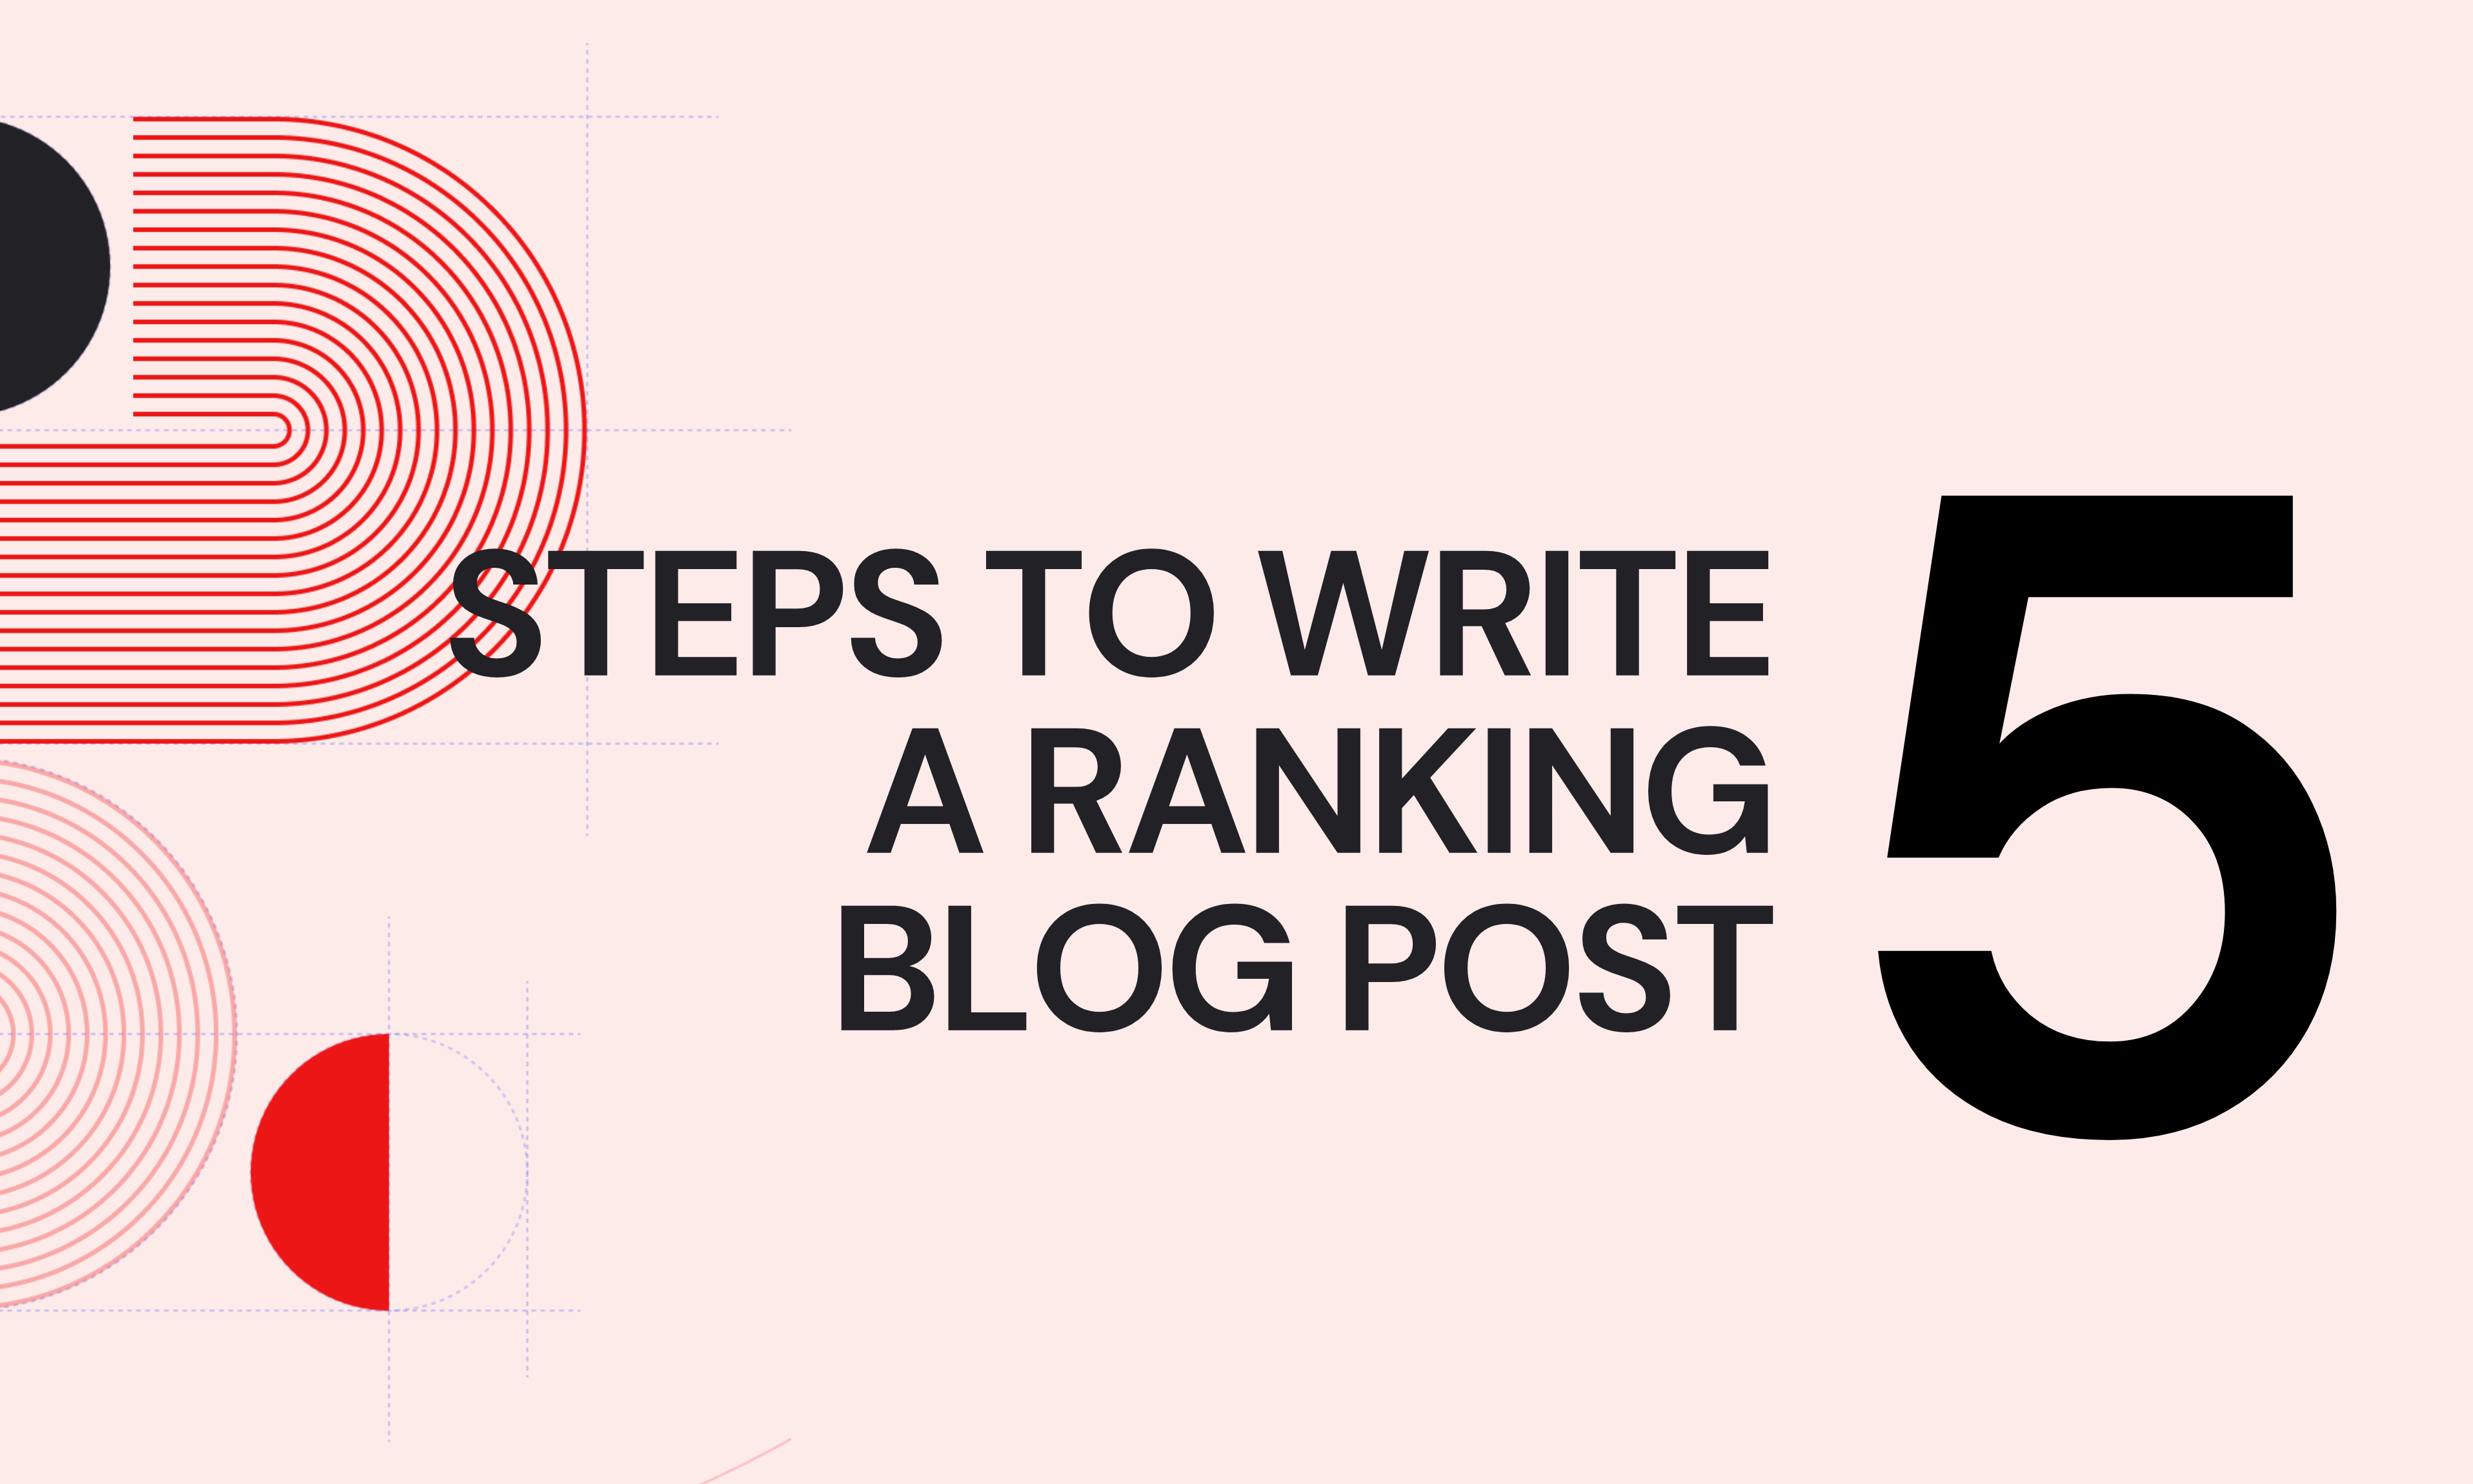 5 Steps To Write A Ranking Blog Post